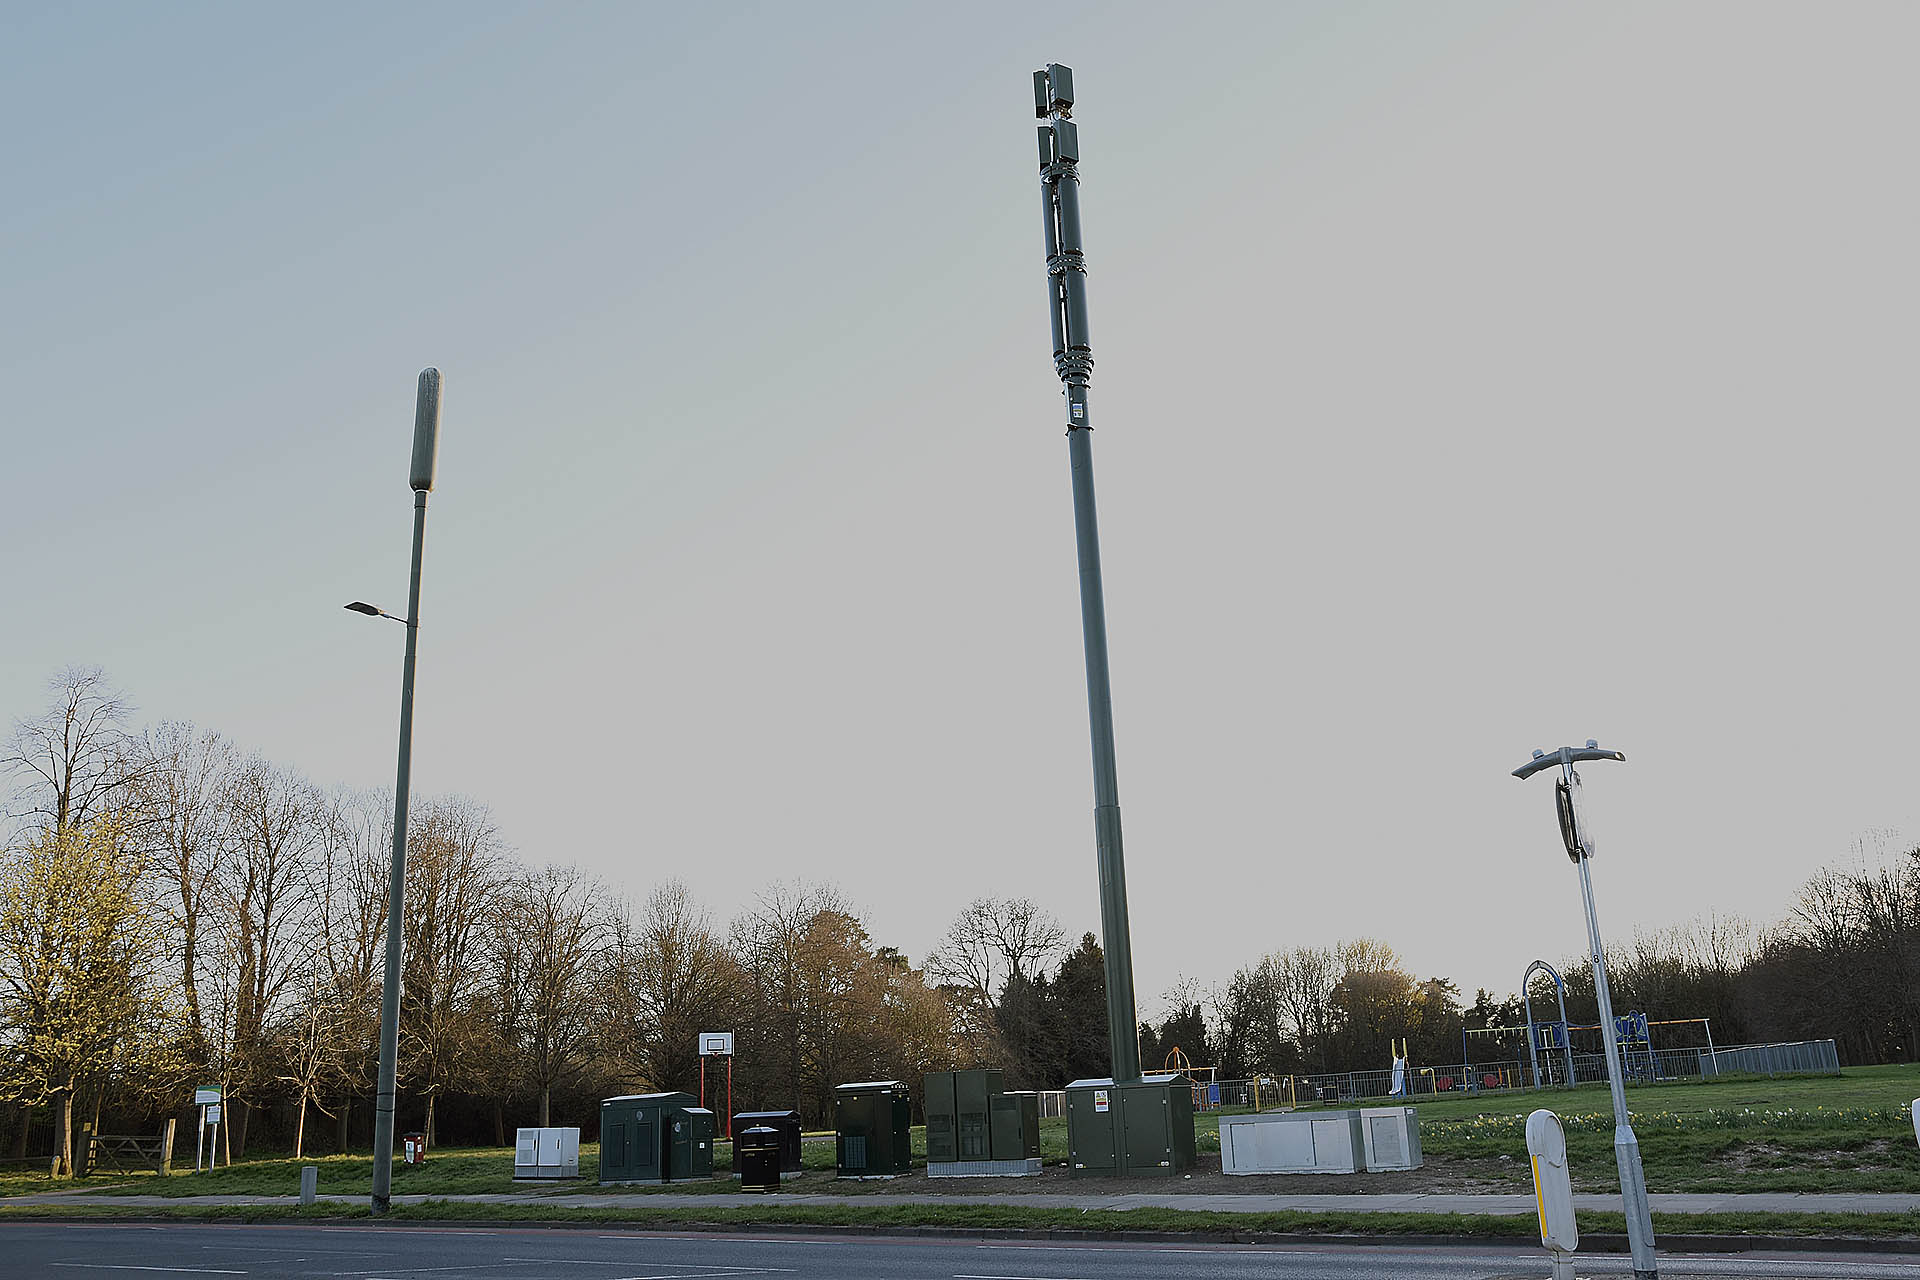 5G MASTS SUDDENLY APPEAR IN GROVEHILL